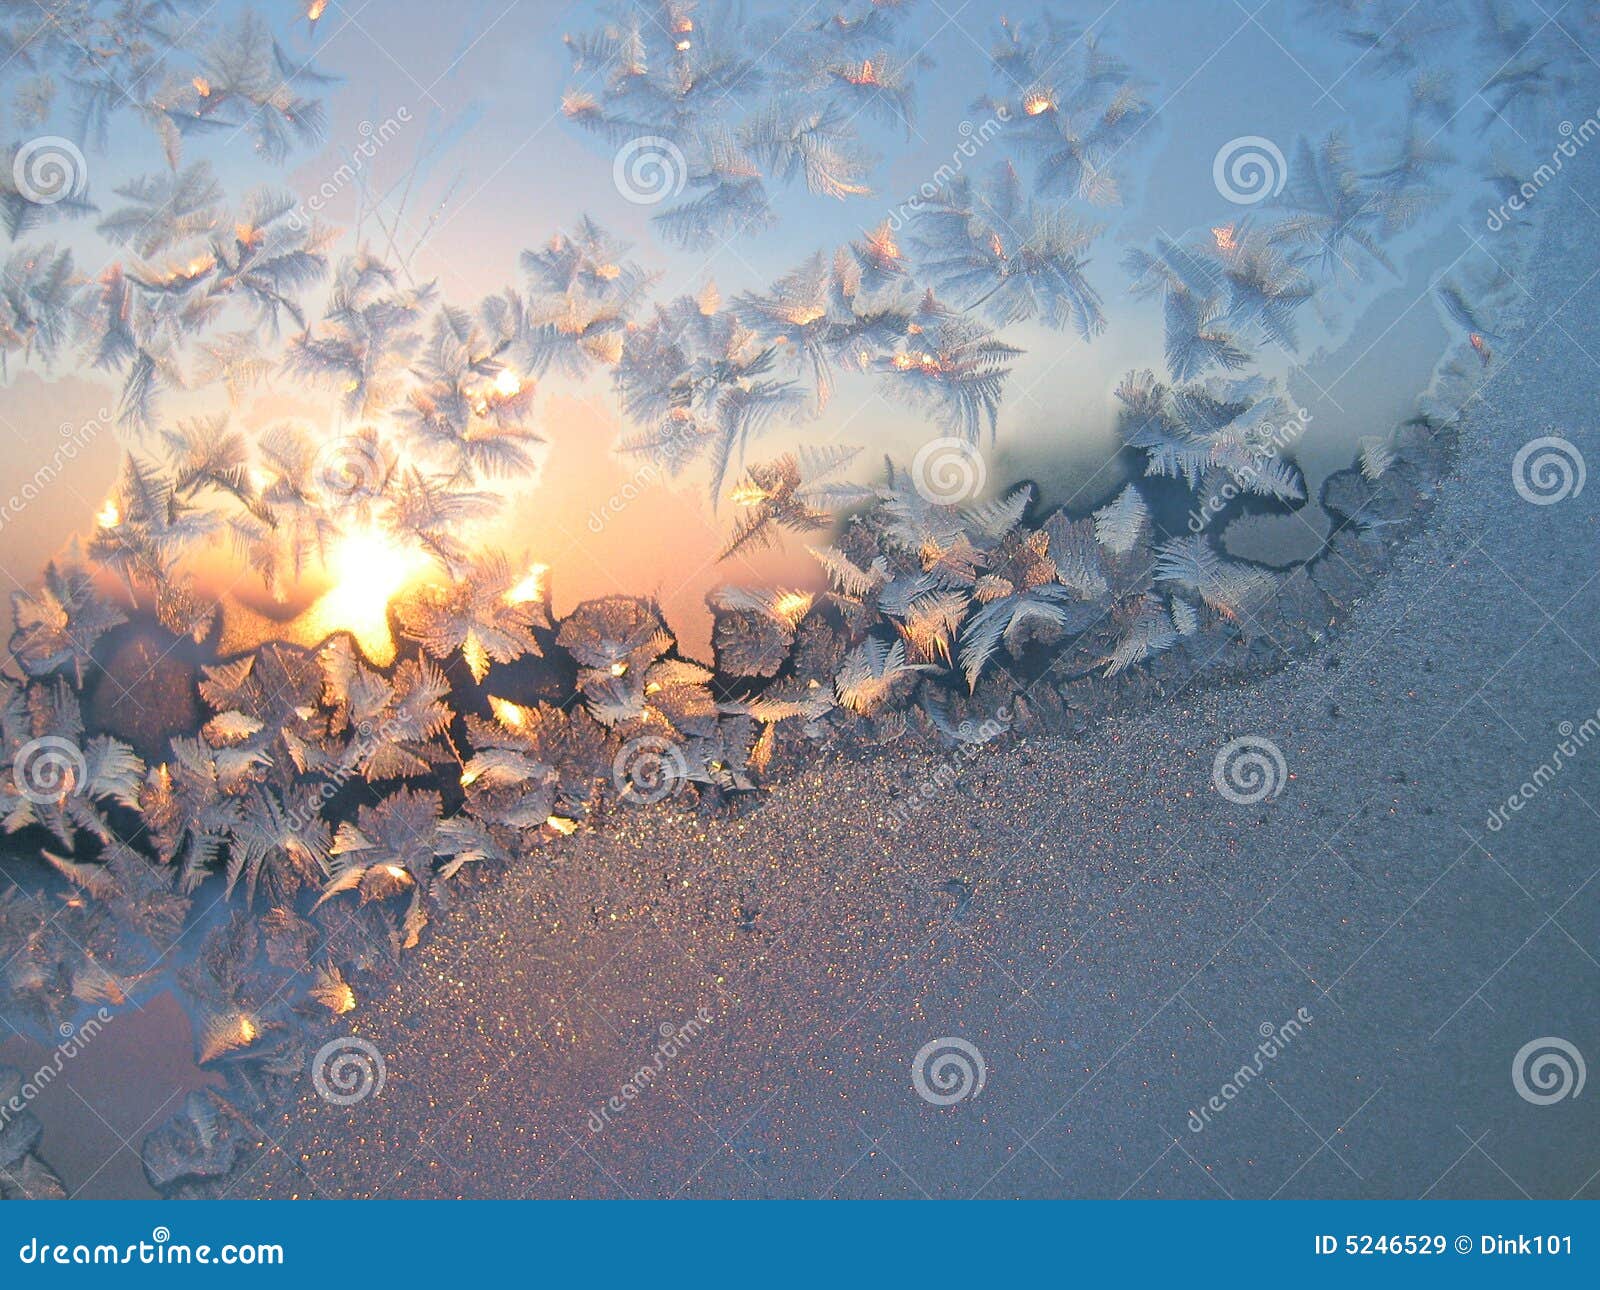 frost and sun background